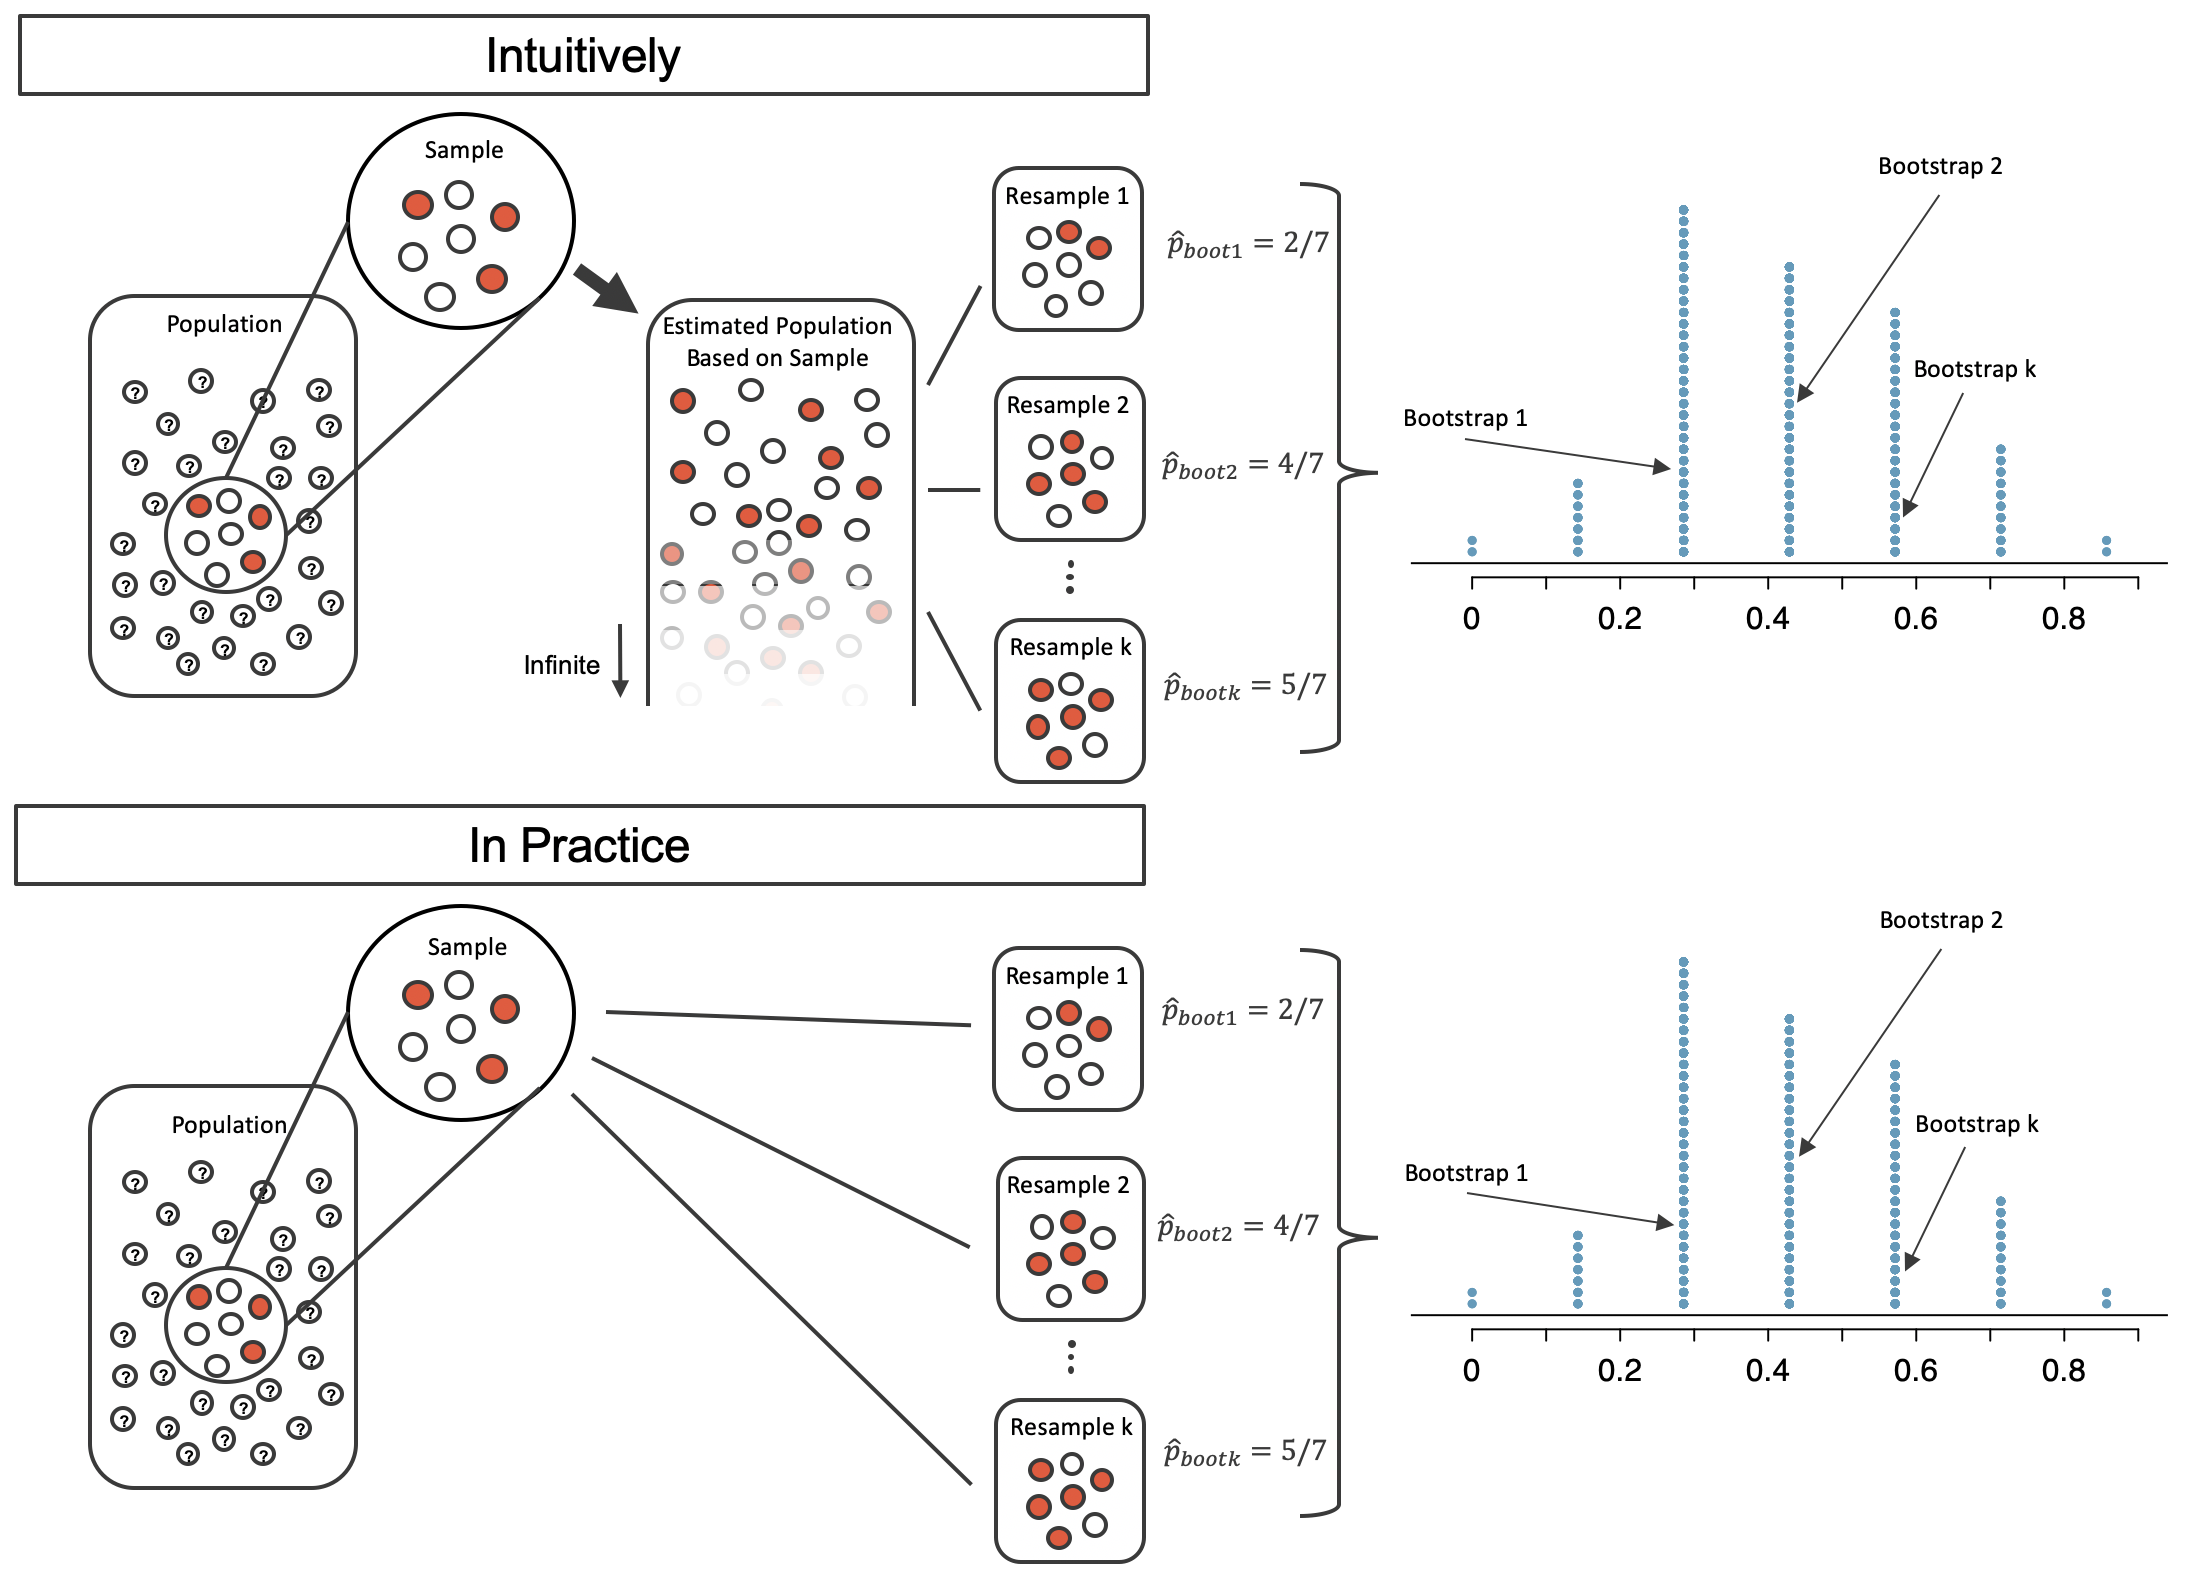 Top image includes the steps of (1) a large unknown population, (2) observed sample of size 7 (with 3 red and 4 white), (3) creation of an infinitely large proxy population, and (4) three resamples.  (5) Many resamples are considered with a dotplot of bootstrapped proportions.  The bottom image follows the same process without the infinitely large proxy population.  That is, in the bottom image a (1) single sample is taken from the original population and (2) the three resamples are taken directly from the observed data (using sampling with replacement).  (3) Again, many resamples are considered with a dotplot of bootstrapped proportions.